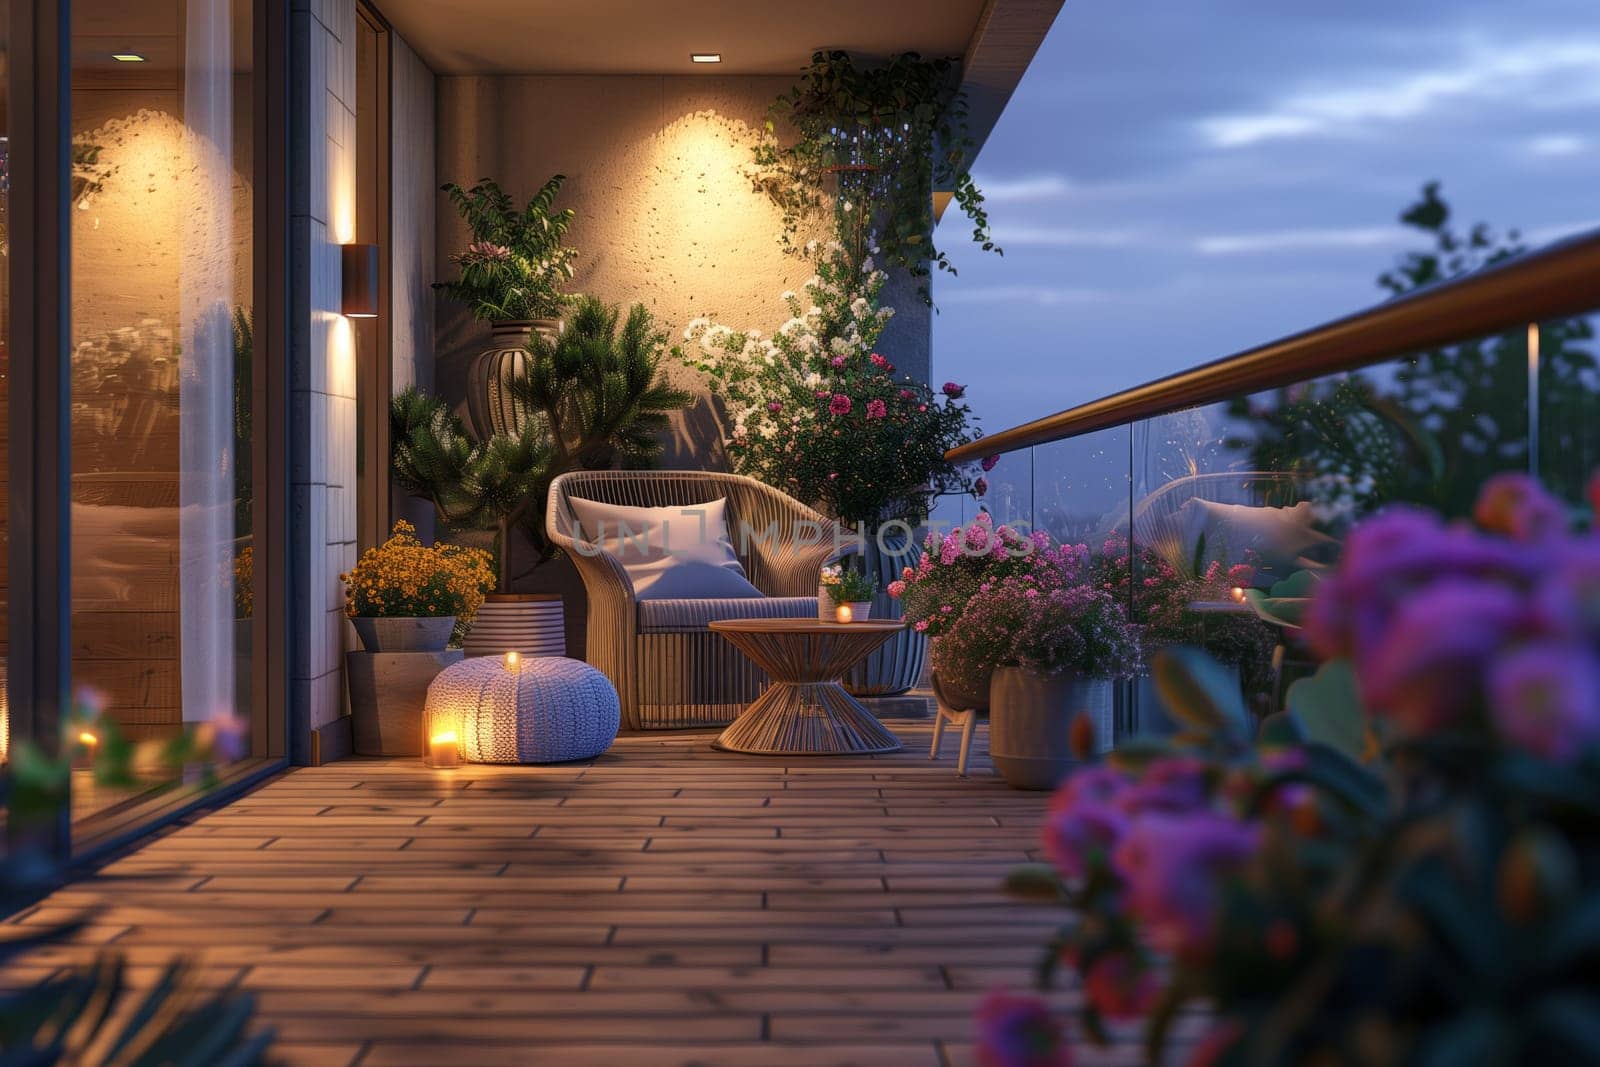 Balcony adorned with plants and flowers, overlooking a cloudfilled sky by richwolf